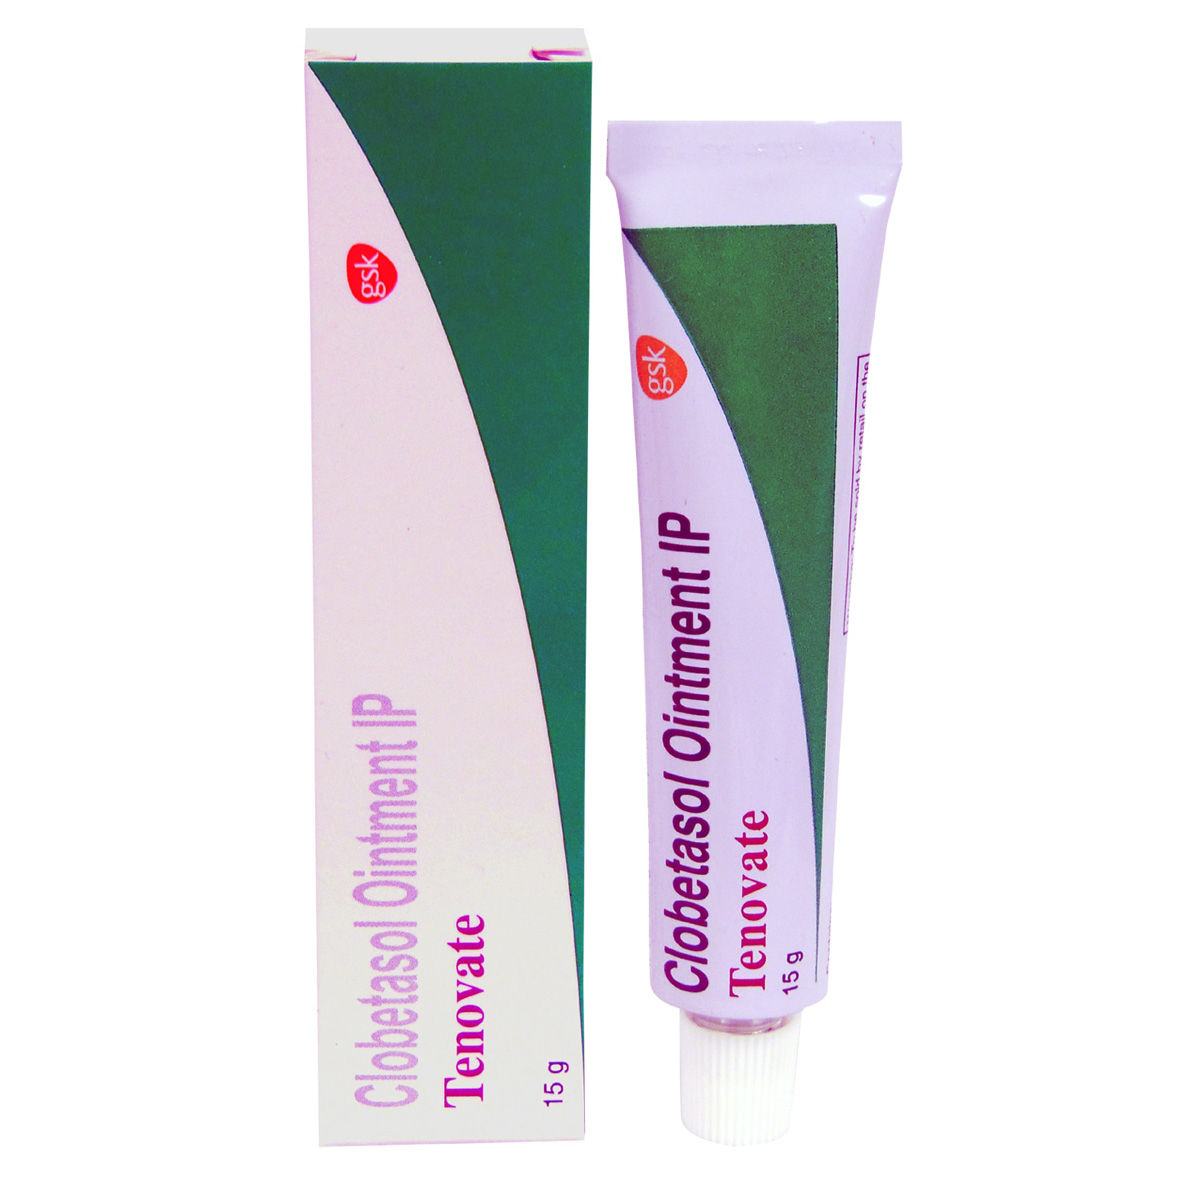 Buy Tenovate Ointment 15 gm Online